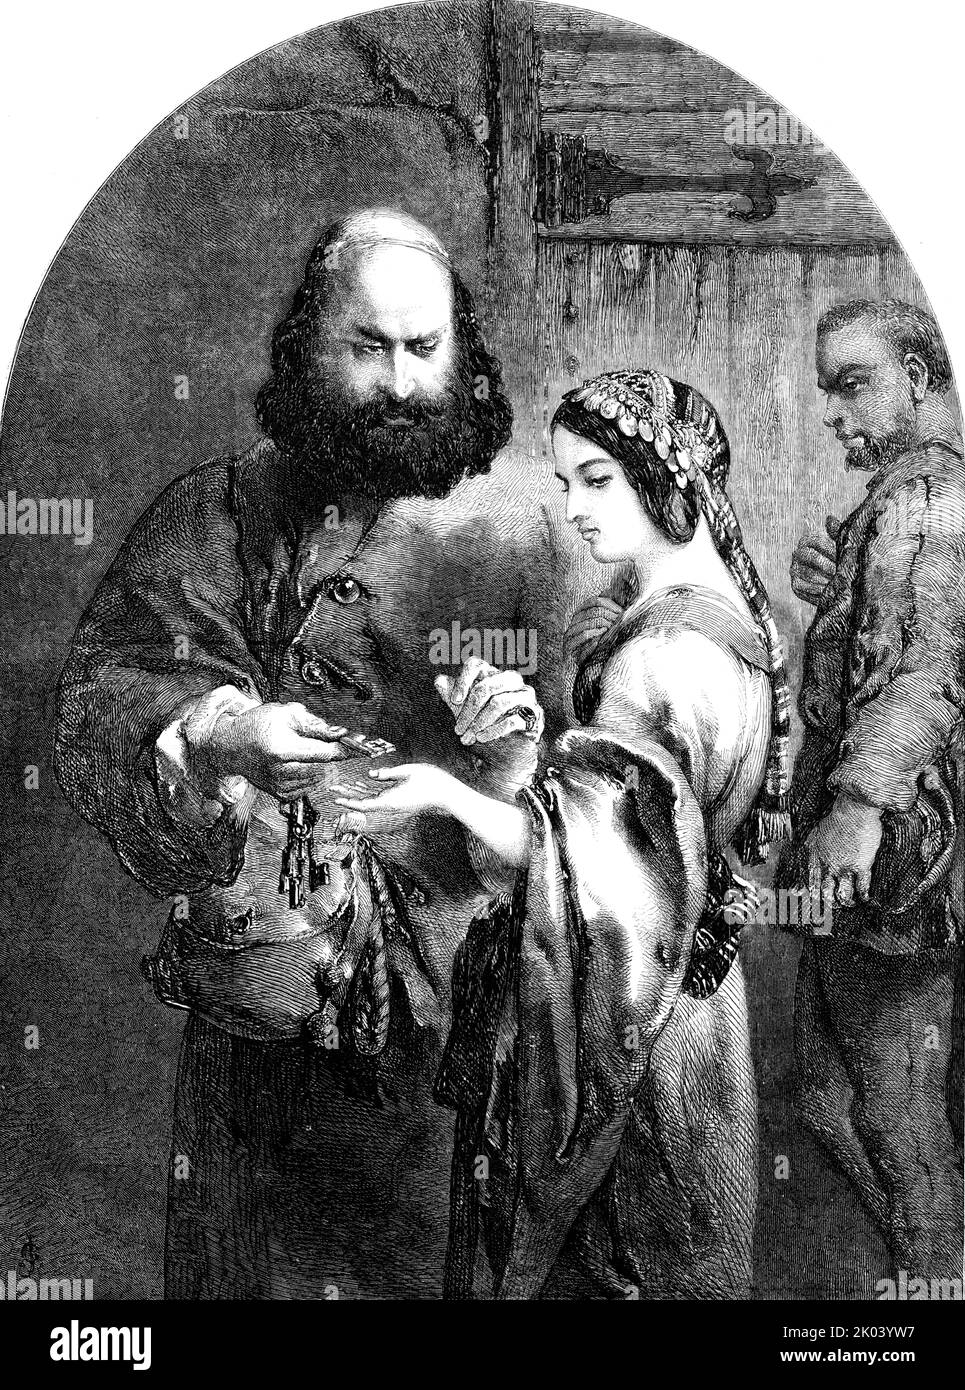 &quot;Shylock and Jessica&quot; - drawn by John Gilbert, 1854. 'Mr. Gilbert has selected for Illustration a scene from Shakspeare's charming; play of &quot;The Merchant of Venice.&quot; It represents one of the milder incidents of the Jew's suspicions...The scene presented the artist with an opportunity for the display of the striking costume of the drama, of which he has gracefully availed himself. The Jew wears &quot;his Jewish gaberdine;&quot; the maiden wears in her hair sequins; the impersonation realises Mr. Knight's characteristic of her - &quot;young, agreeable, intelligent, formed for Stock Photo